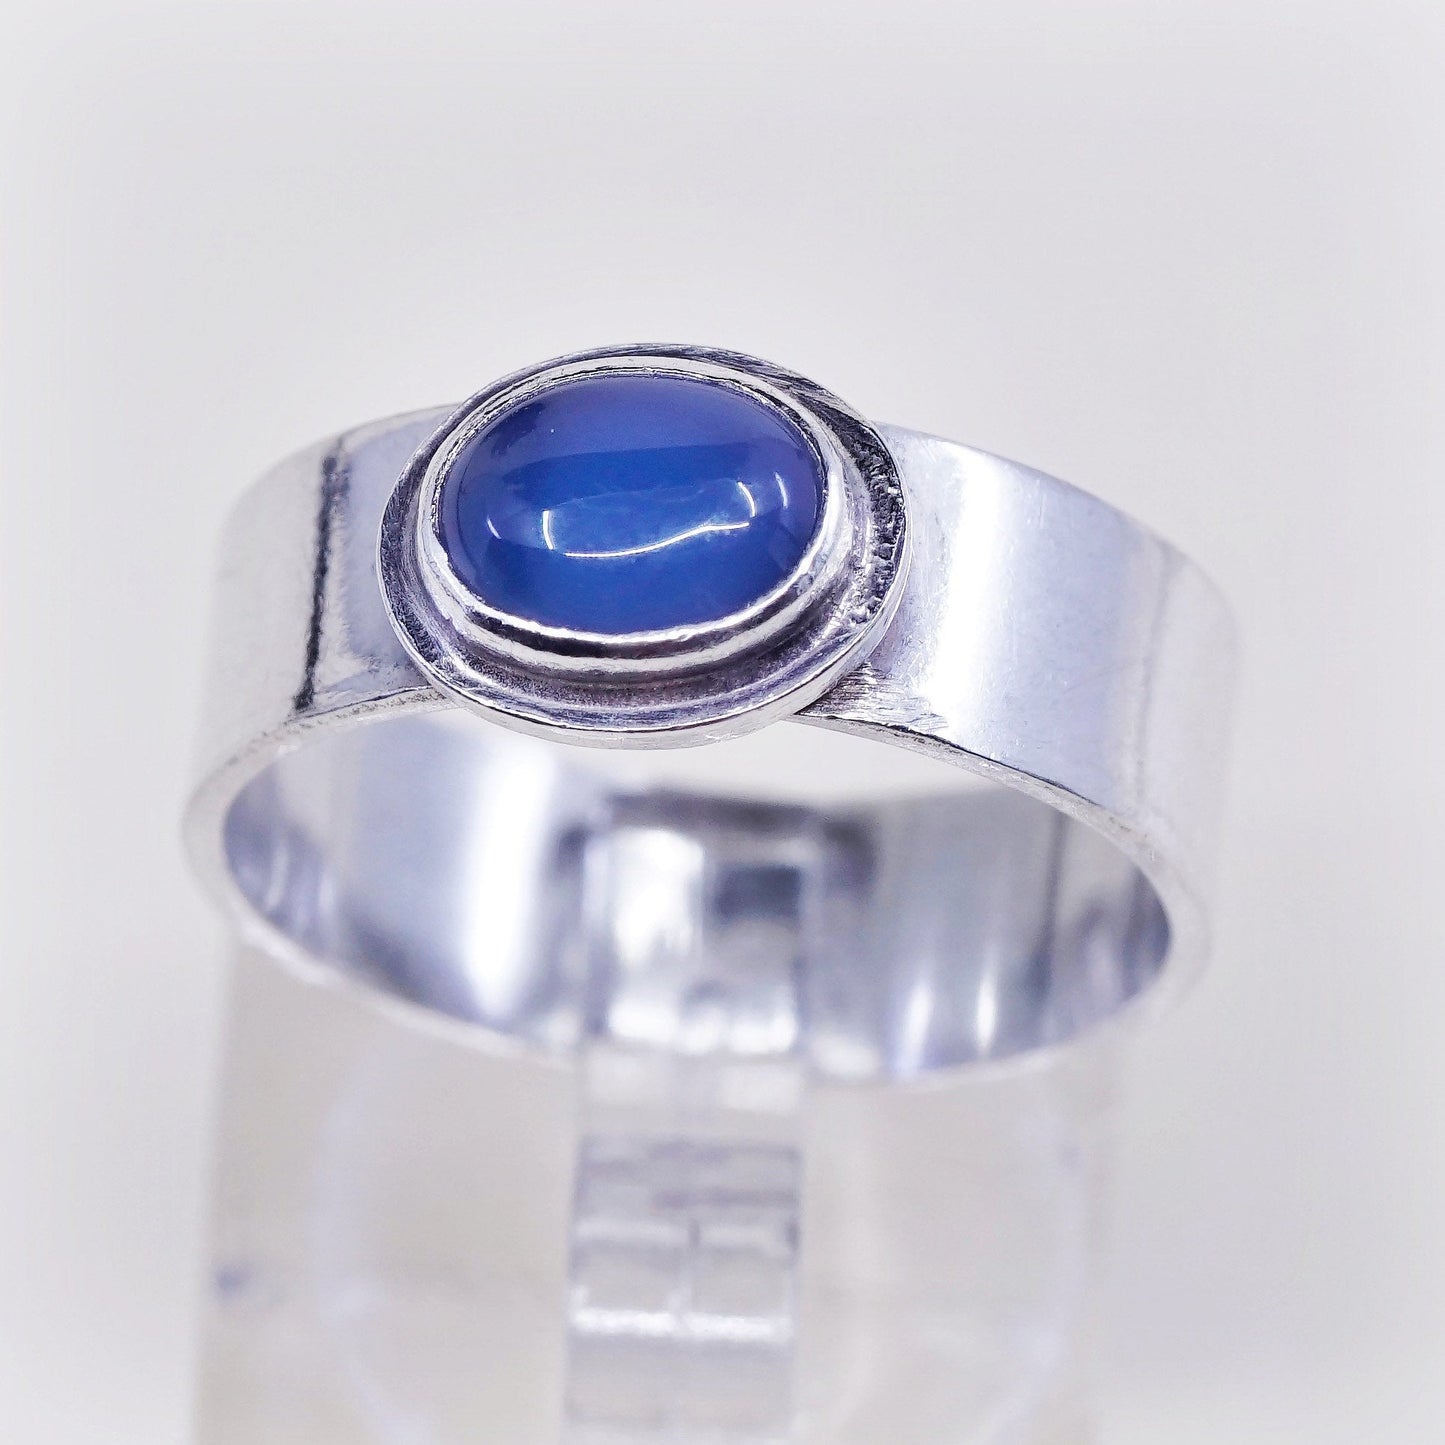 sz 9.25, vtg Sterling silver statement ring, 925 stackable band w/ blue crystal